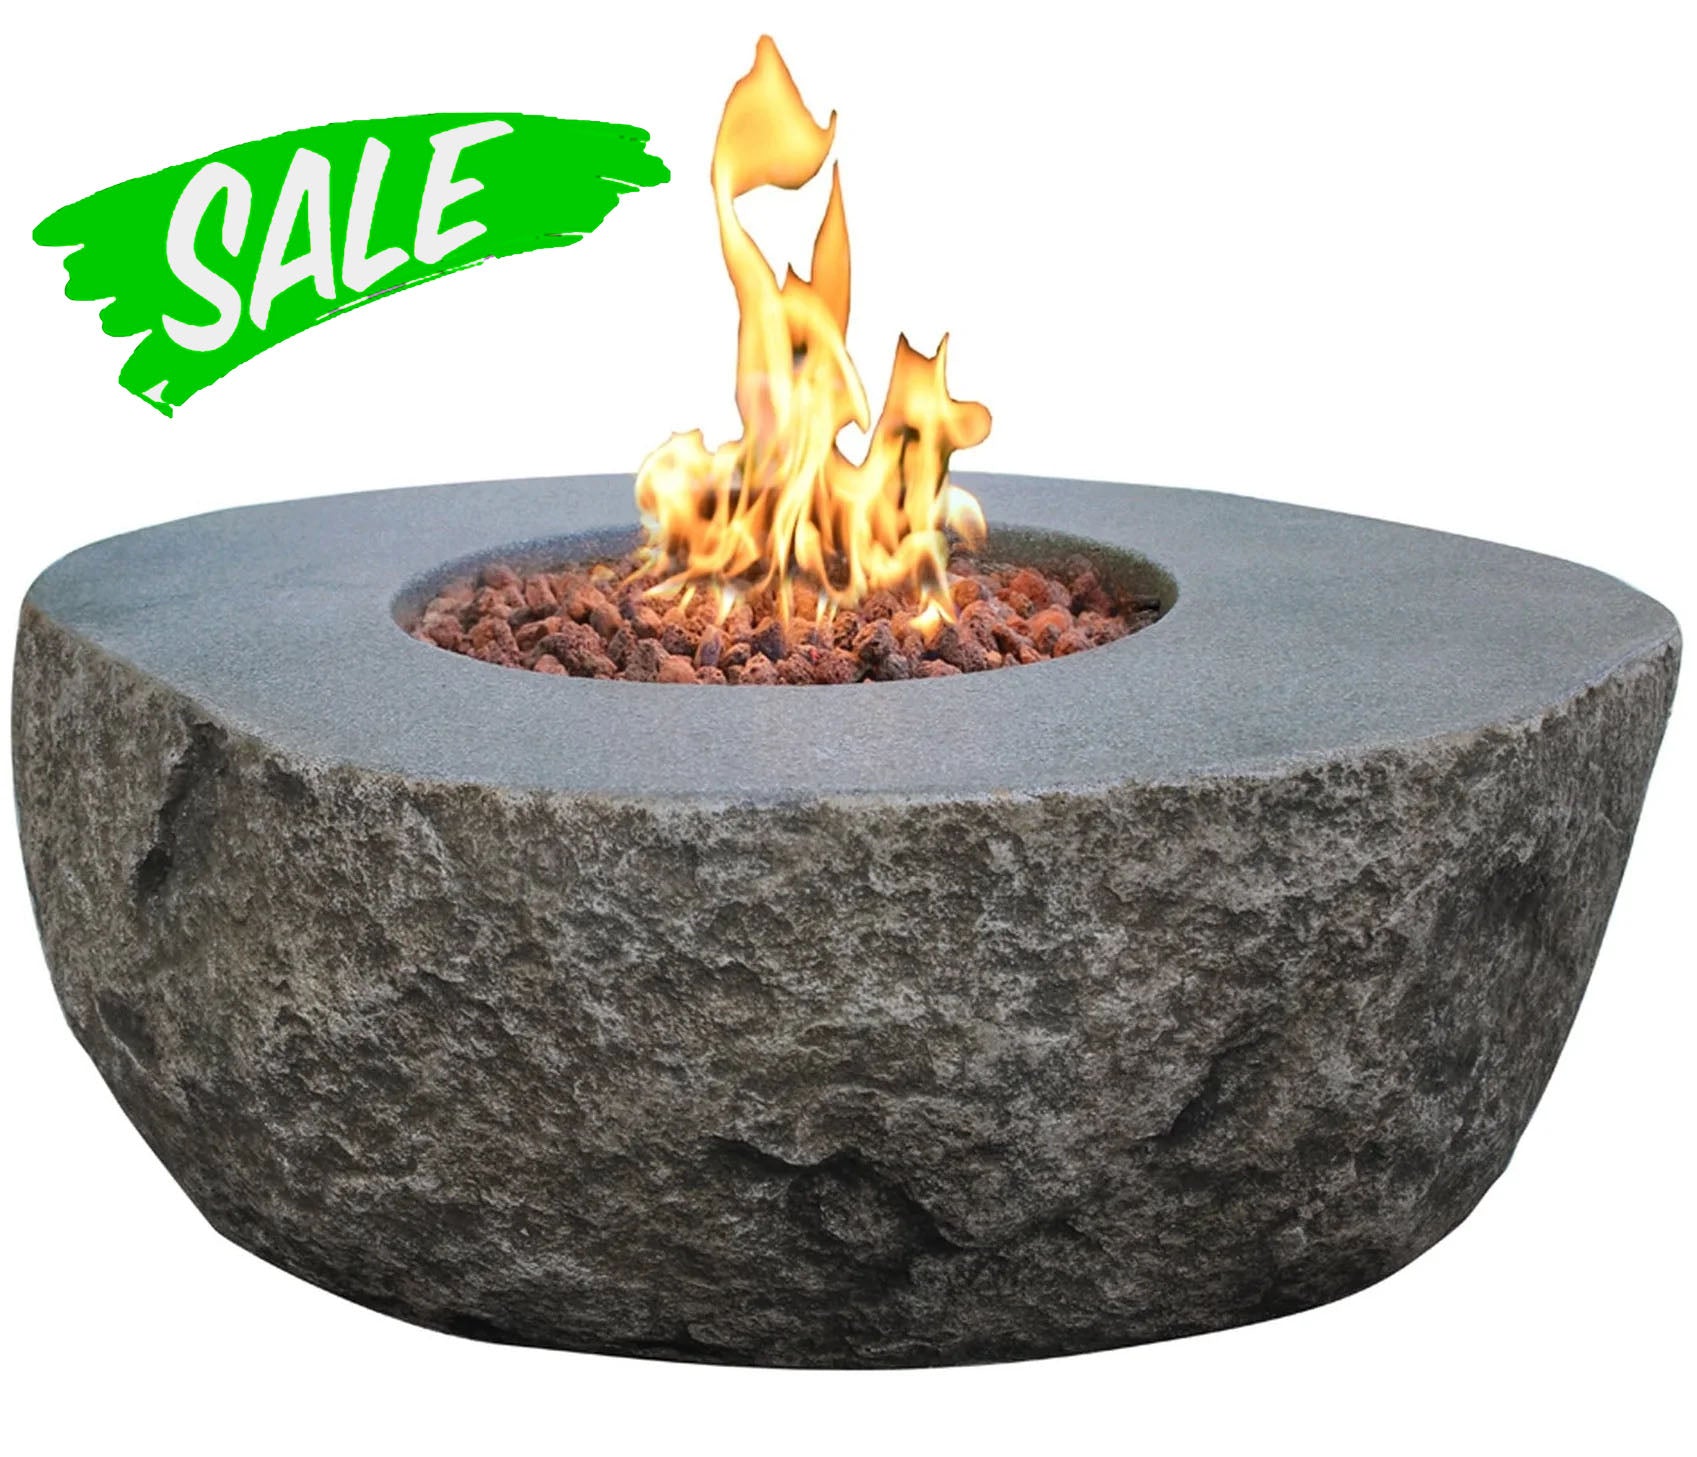 an image of the elementi boulder fire table with a sale tag